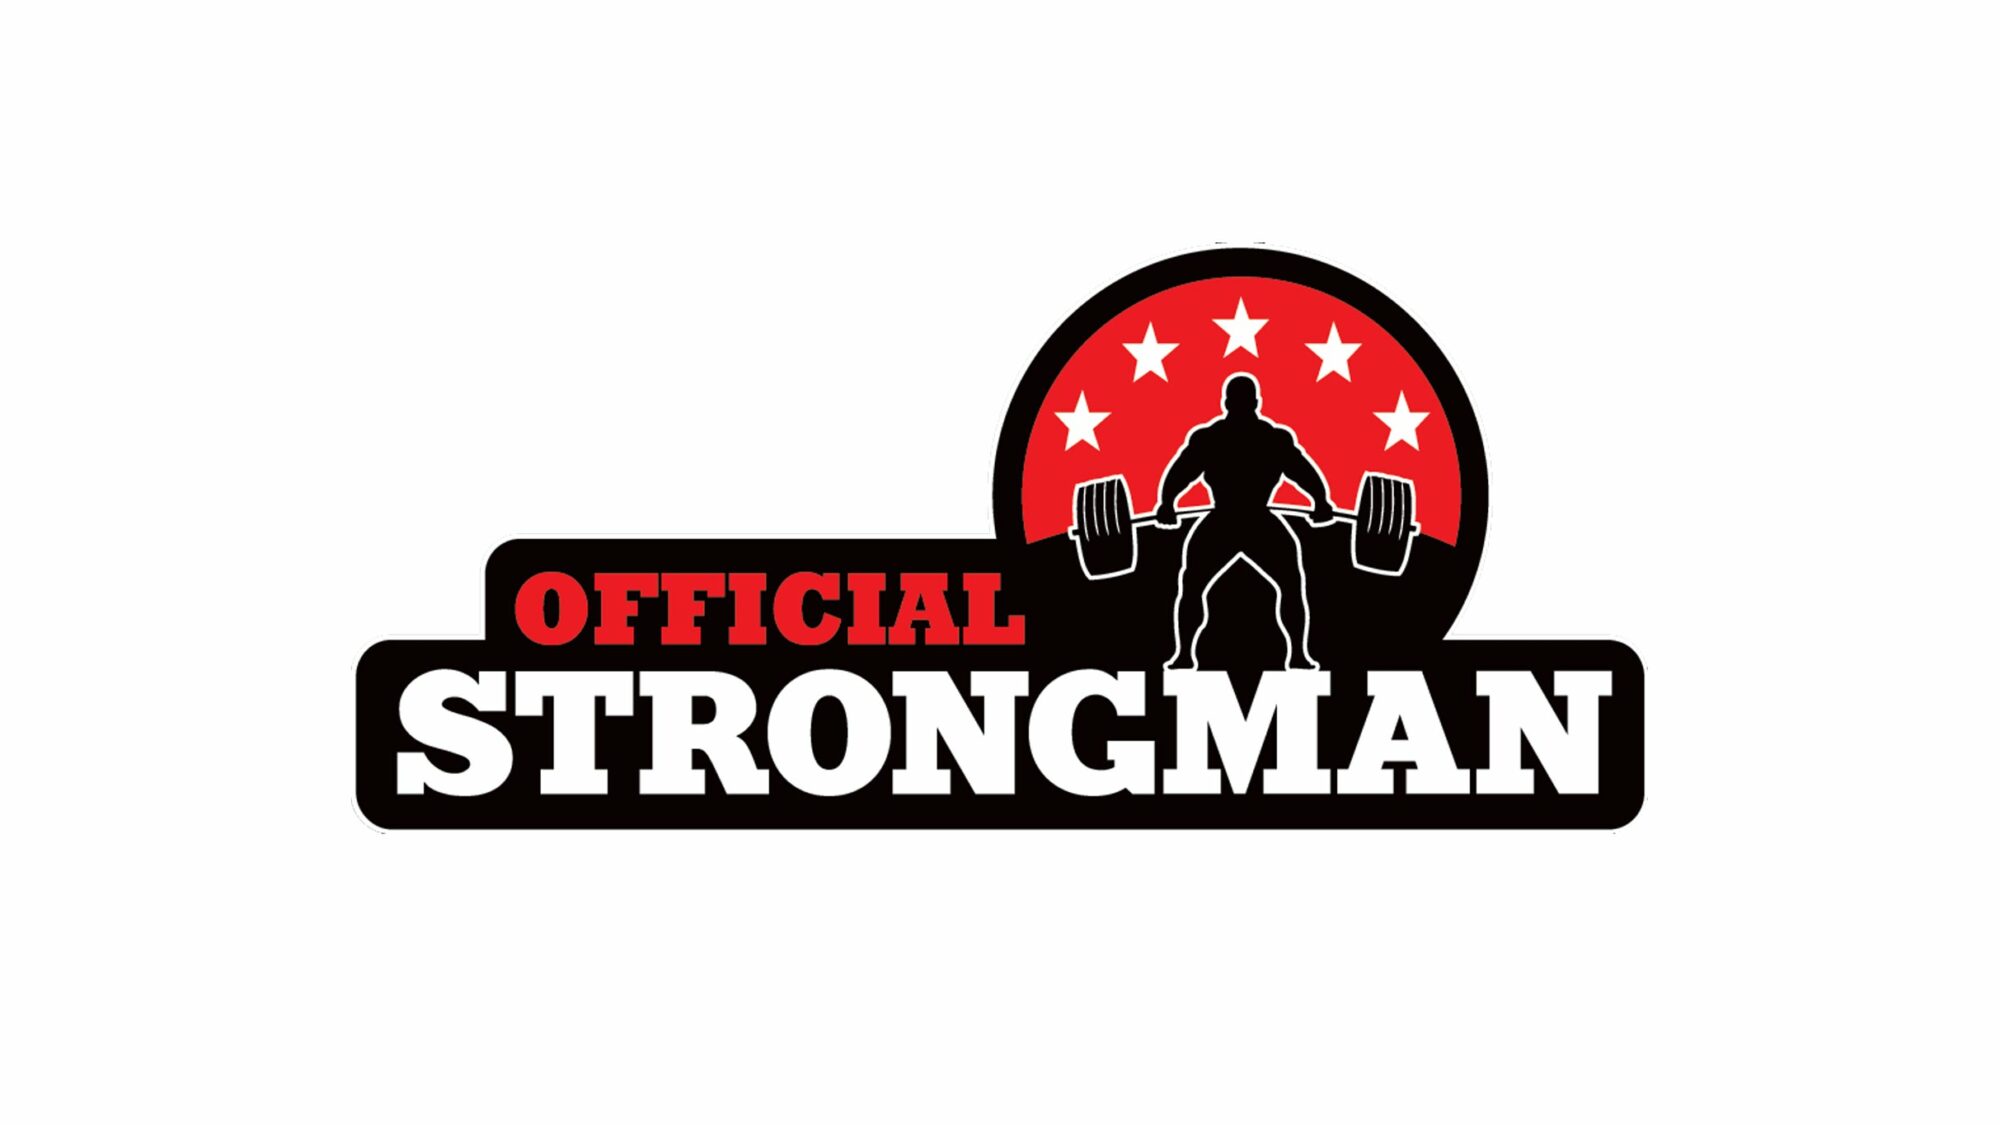 Image name Official Strongman European Championships Weekend Ticket at York Barbican York the 1 image from the post Official Strongman European Championships Day Ticket - Saturday at York Barbican, York in Yorkshire.com.